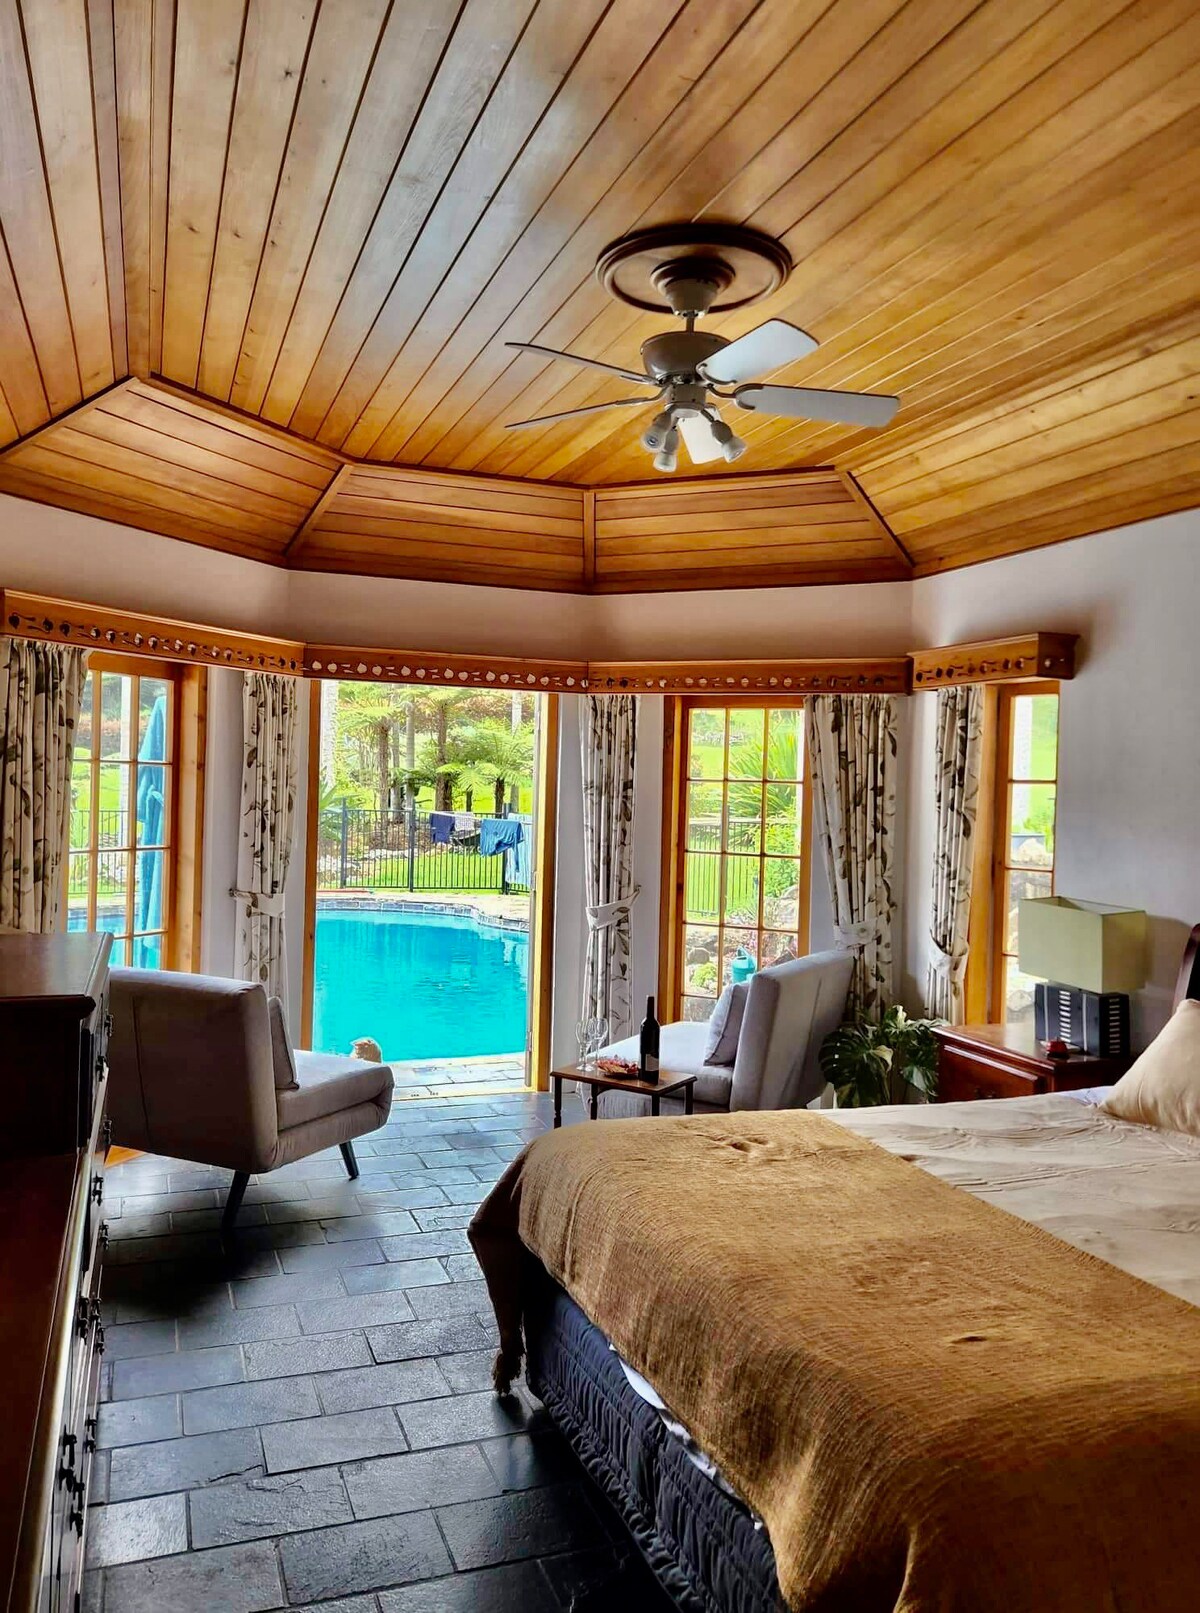 Private Bedroom with  pool on your doorstep